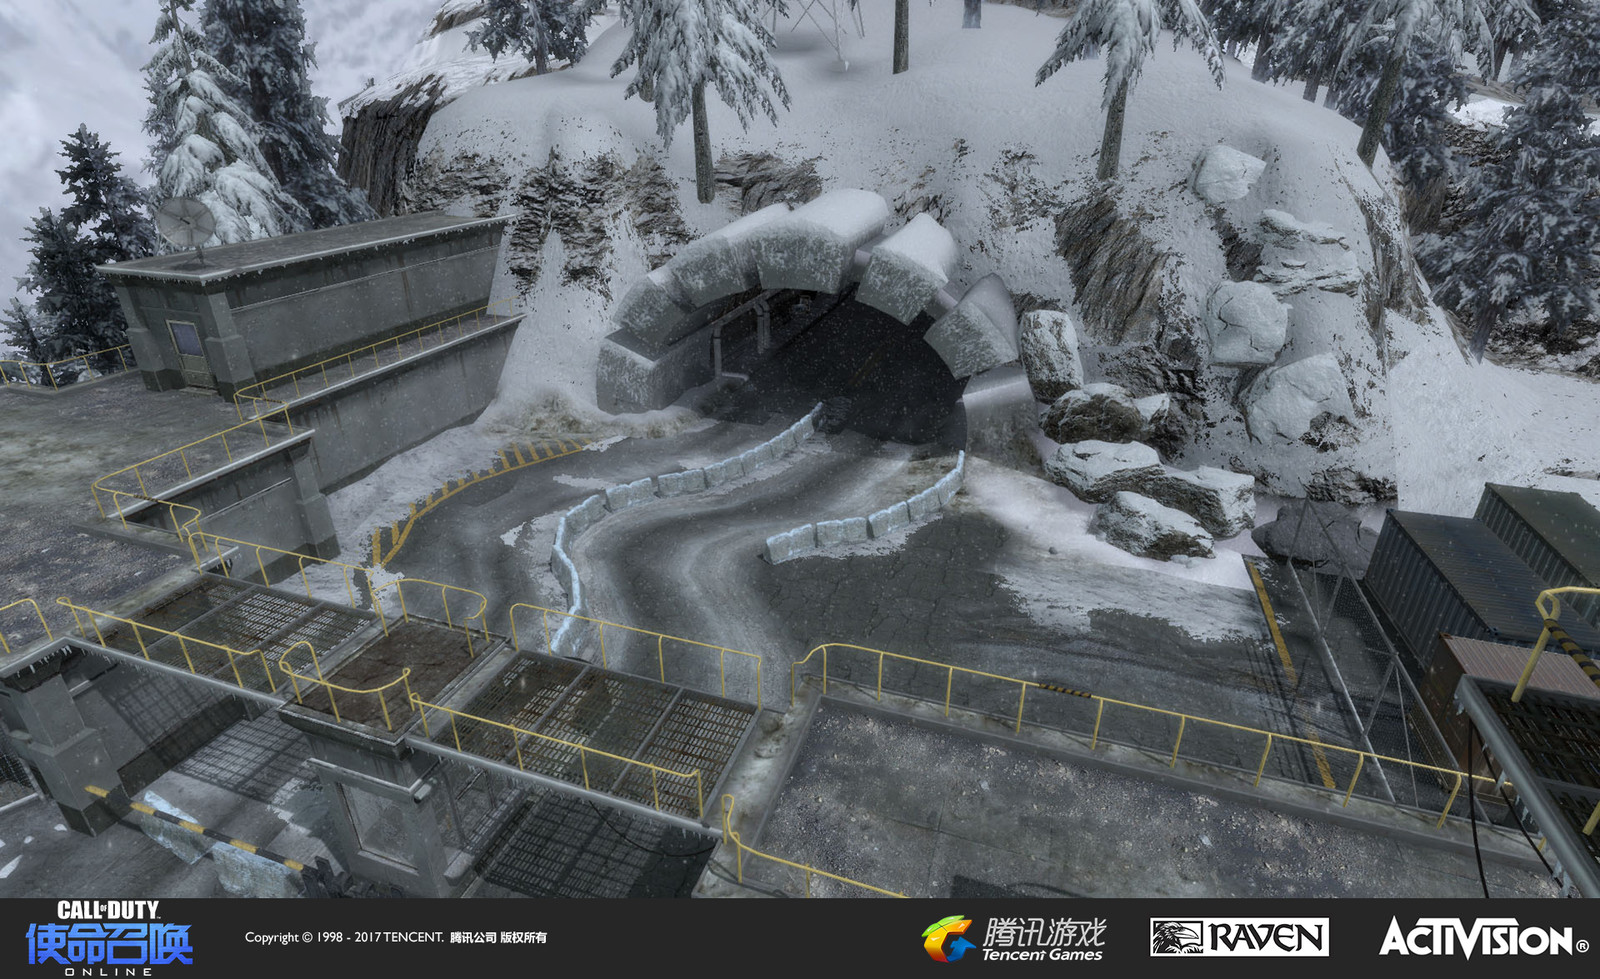 Summit: This is a multiplayer map re-created from Black Ops. I recreated the end section of the map and themed it as a security checkpoint/entrance. I was resonsible for geo, terrain, and texturing in this area. Pat Williams created the buildings.